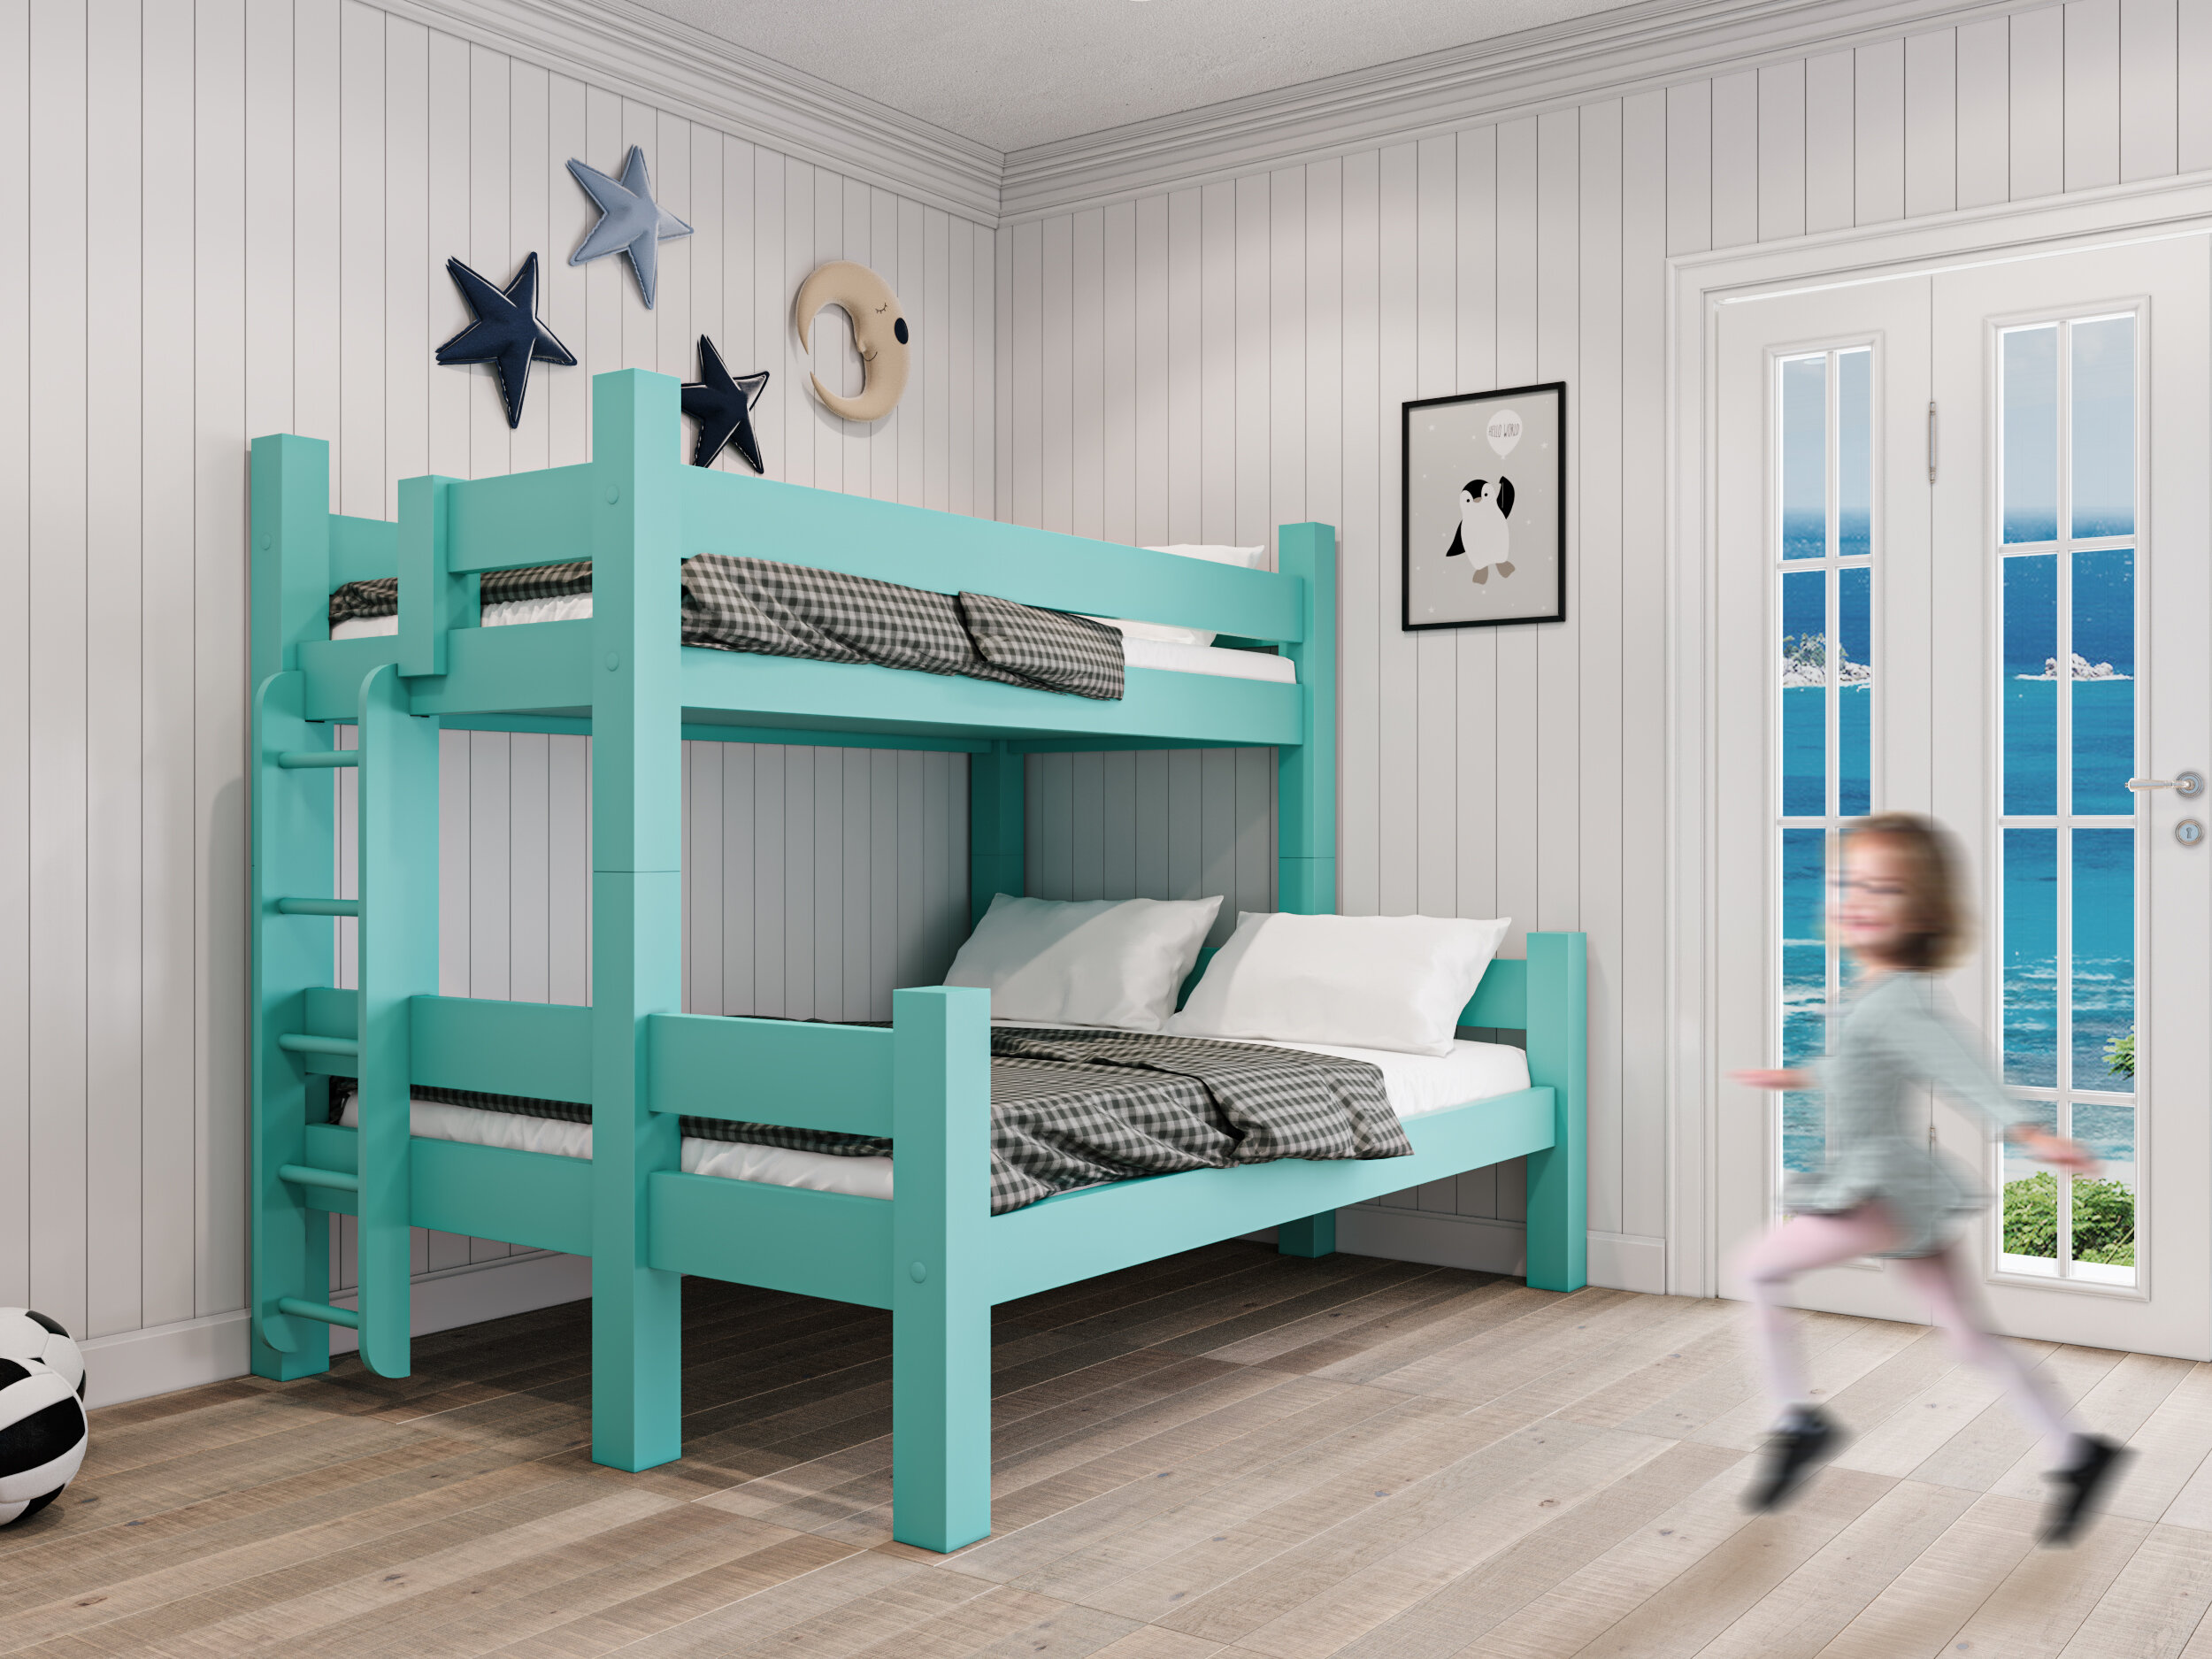 Solid Wood Bunk Beds Wooden, Wooden Dowels For Bunk Beds